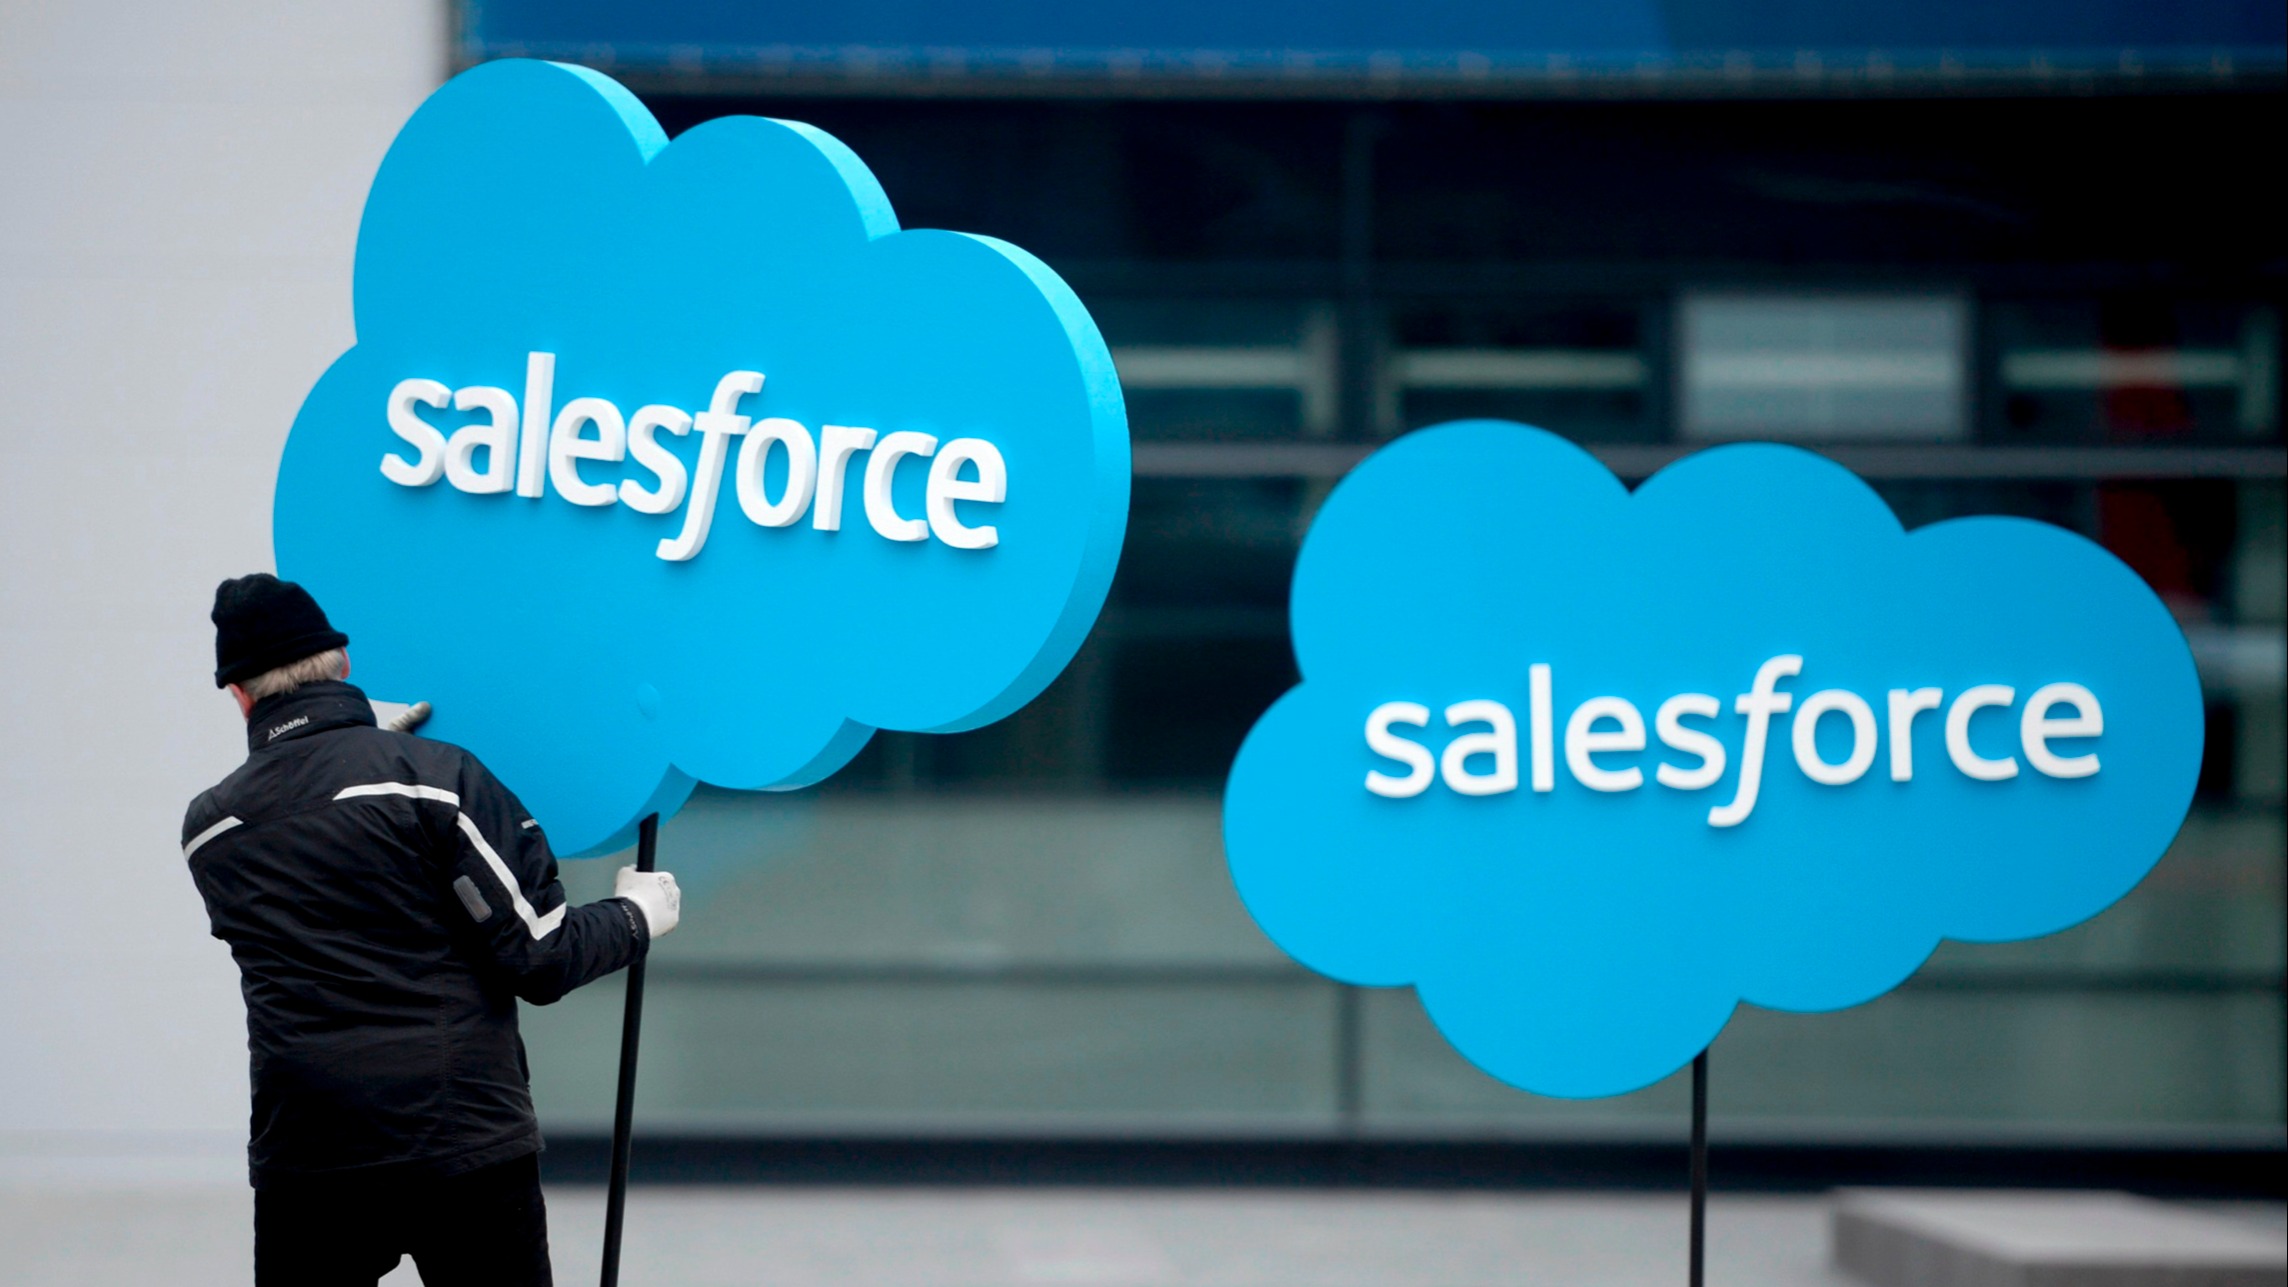 Salesforce to cut 10% of staff as it reverses pandemic hiring spree | Financial Times